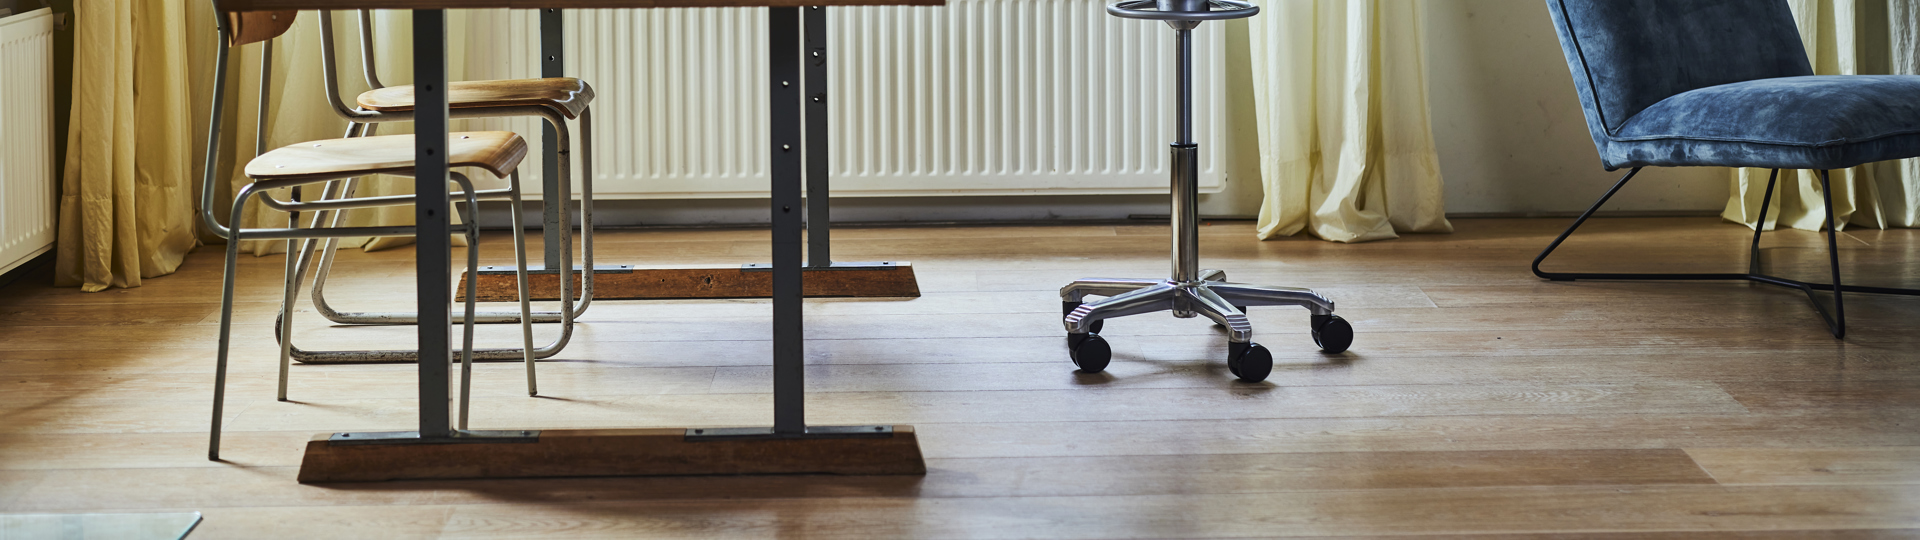 Adjust your office chair correctly in four steps